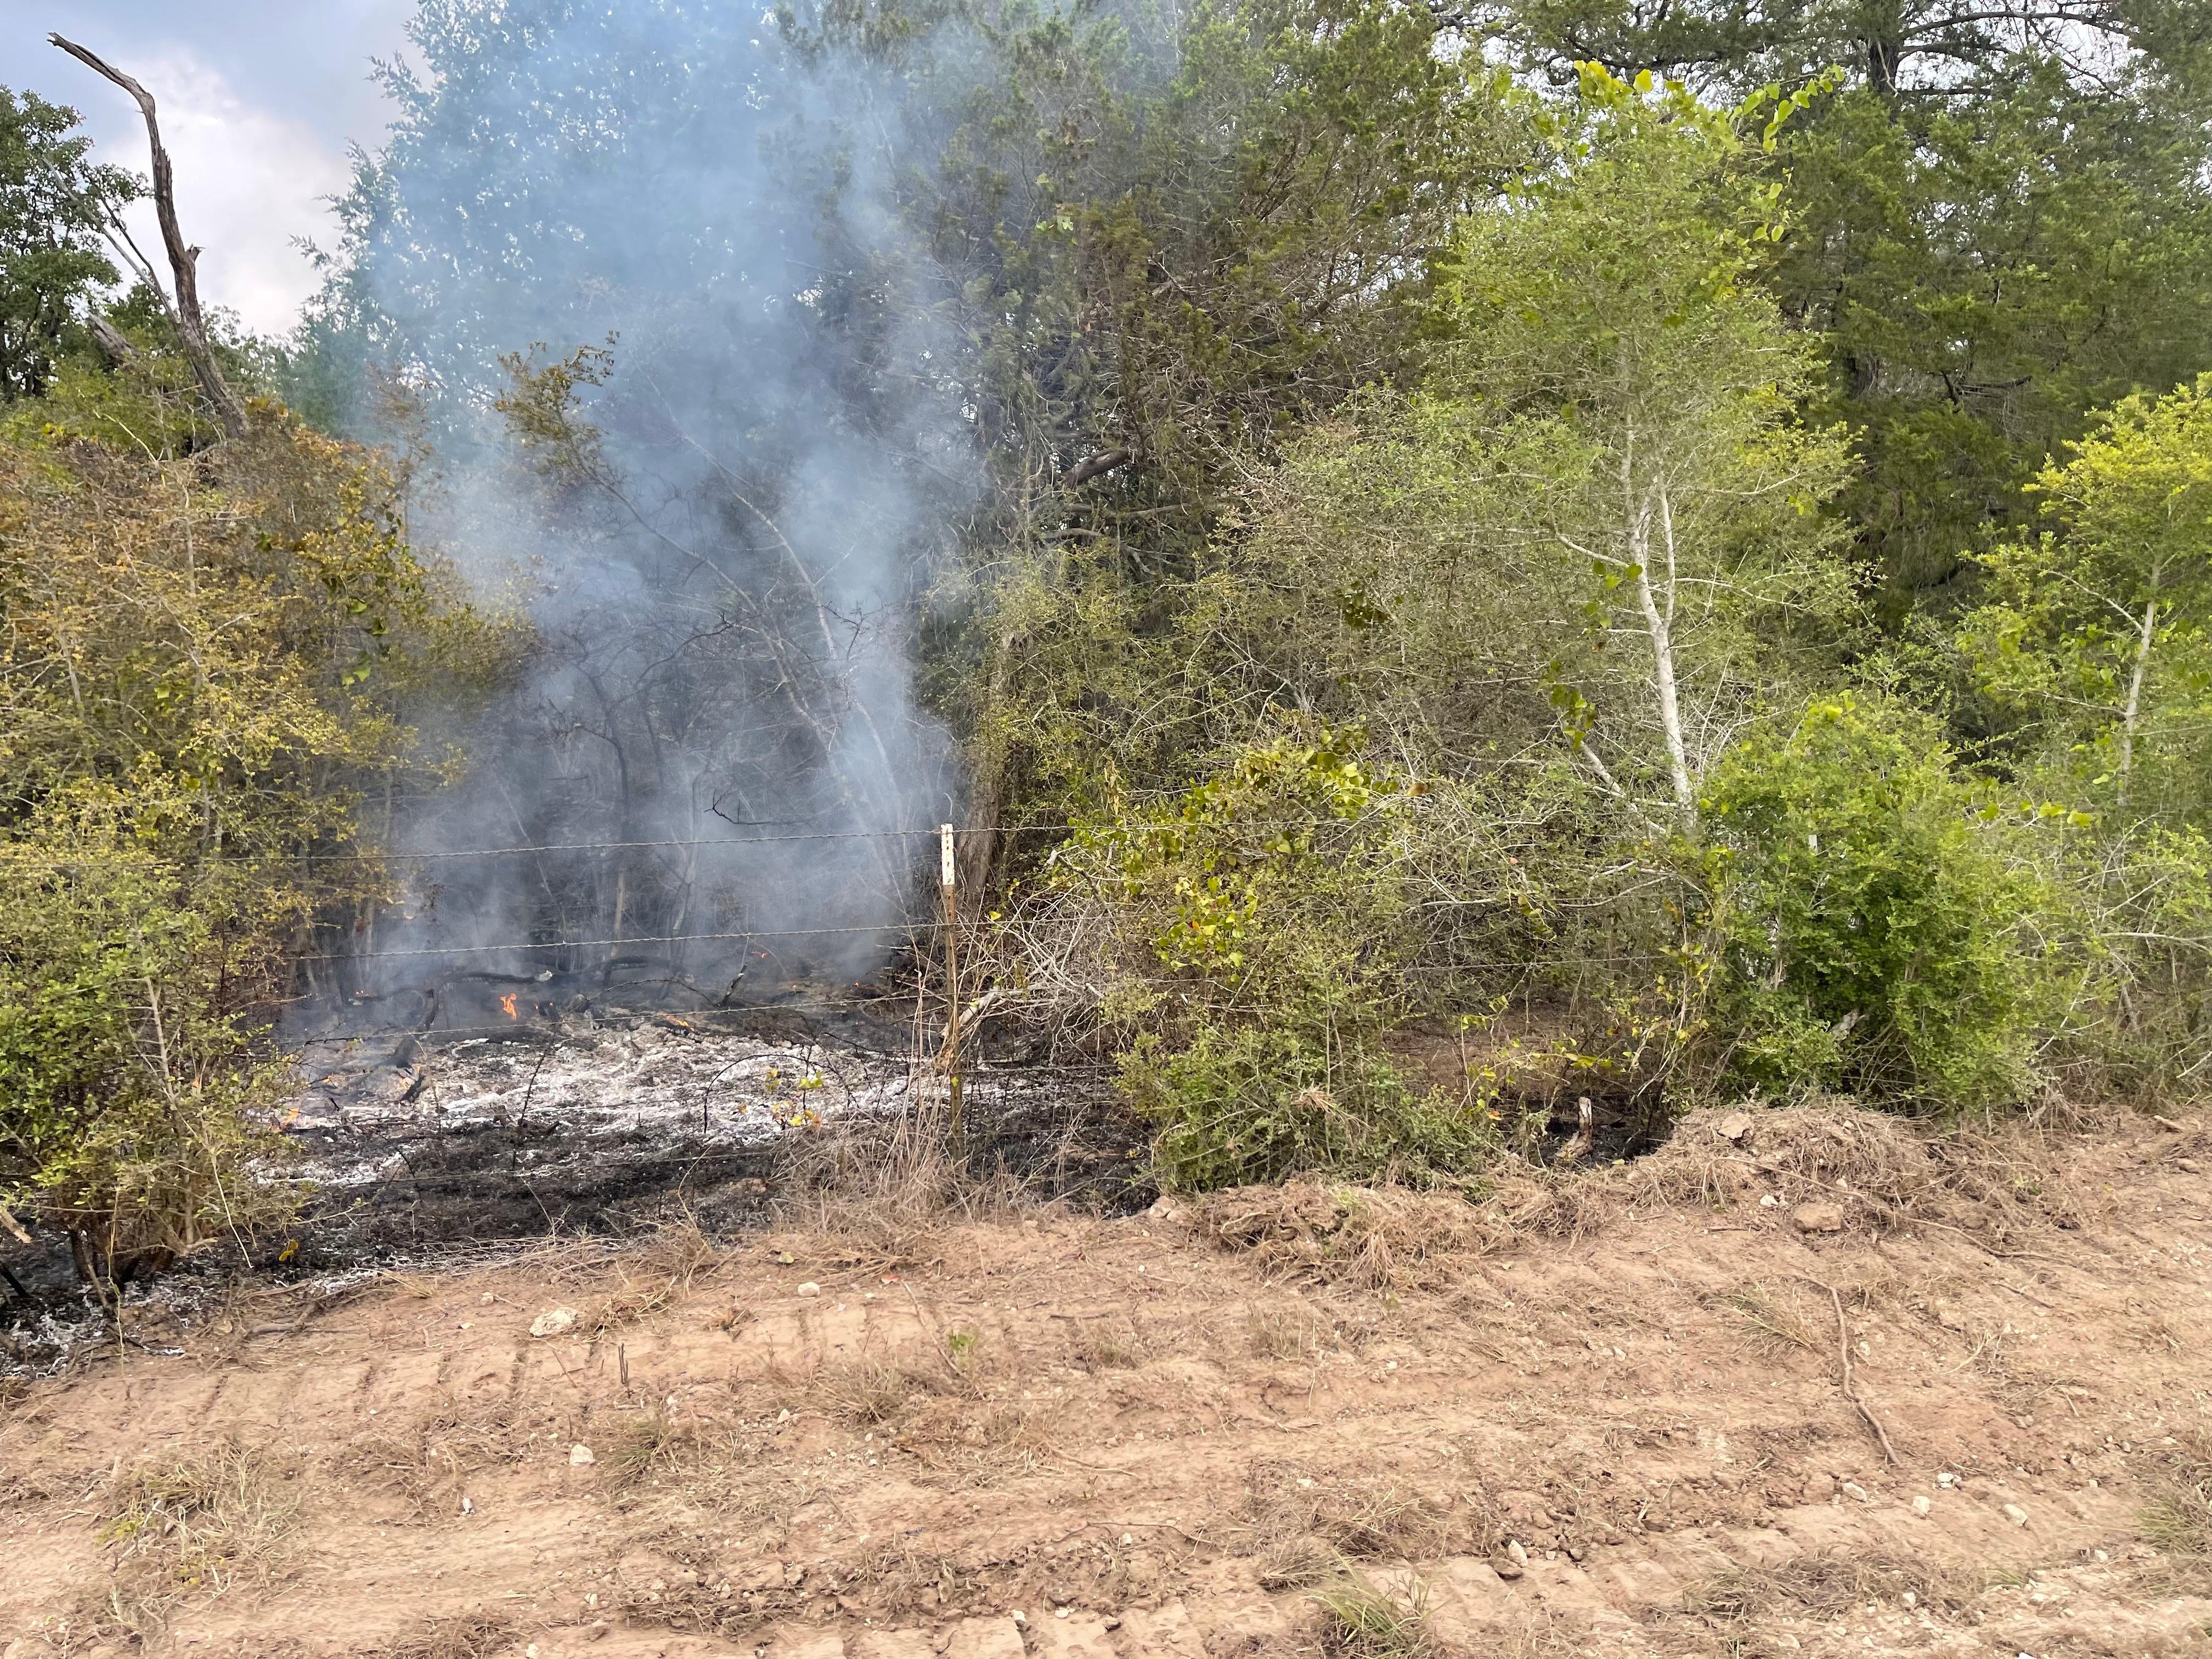 Smoke showing from vegetation that is still holding heat along the roadside